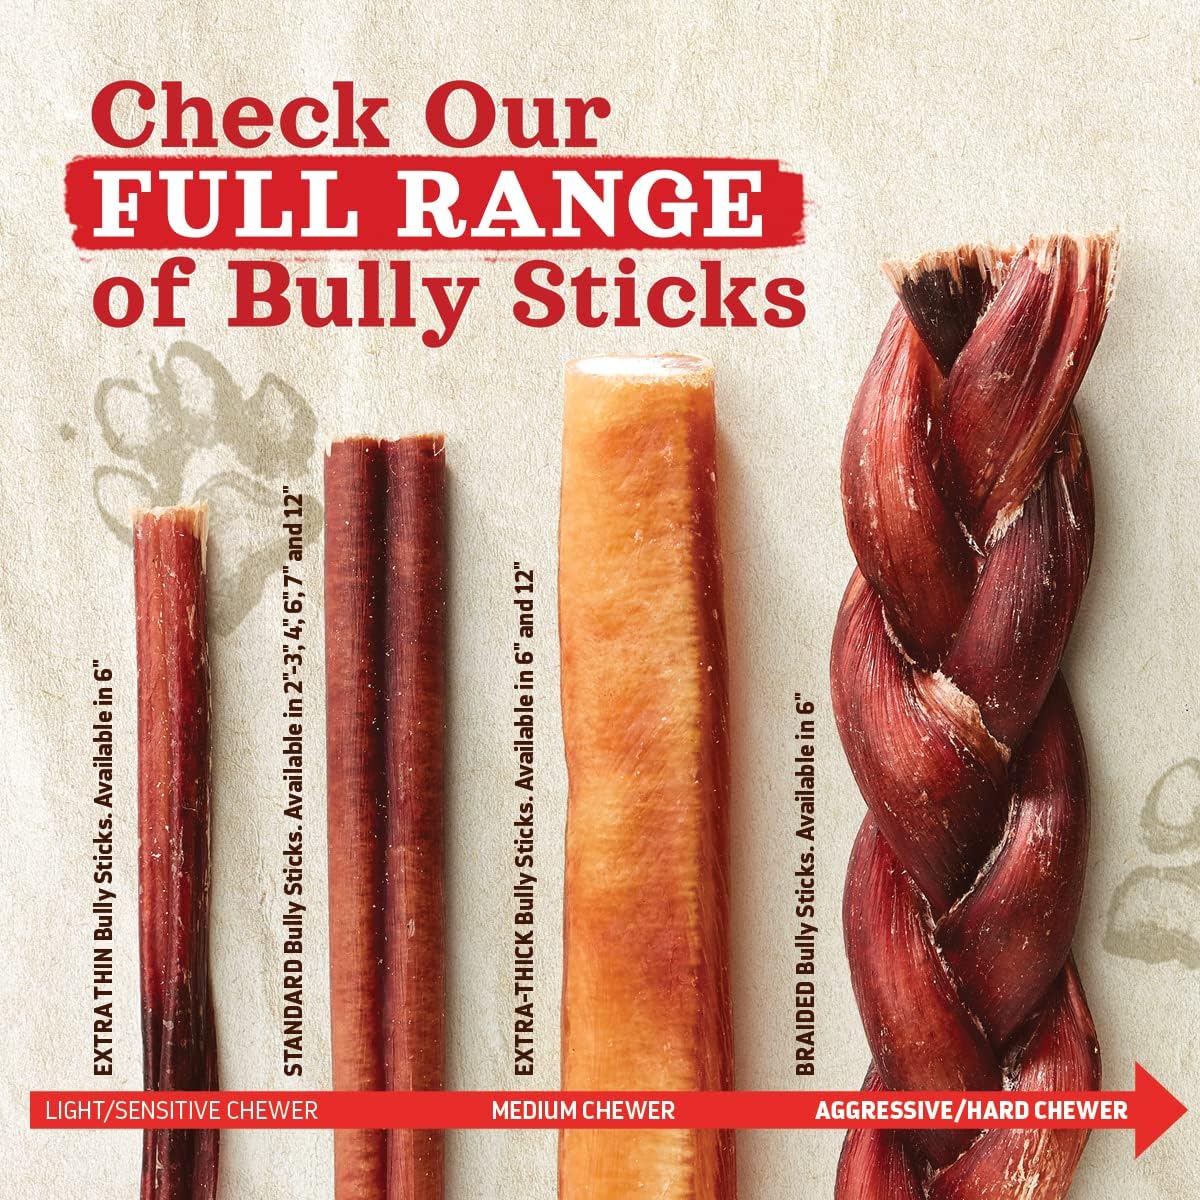 Natural Farm Odor-Free Thin Bully Sticks (12”, 25-Pack) All-Natural Long-Lasting Dog Chews, 100% Beef Pizzle, Grass-Fed, Grain-Free, Protein for Muscle Development & Energy, Perfect for Large Dogs : Pet Supplies